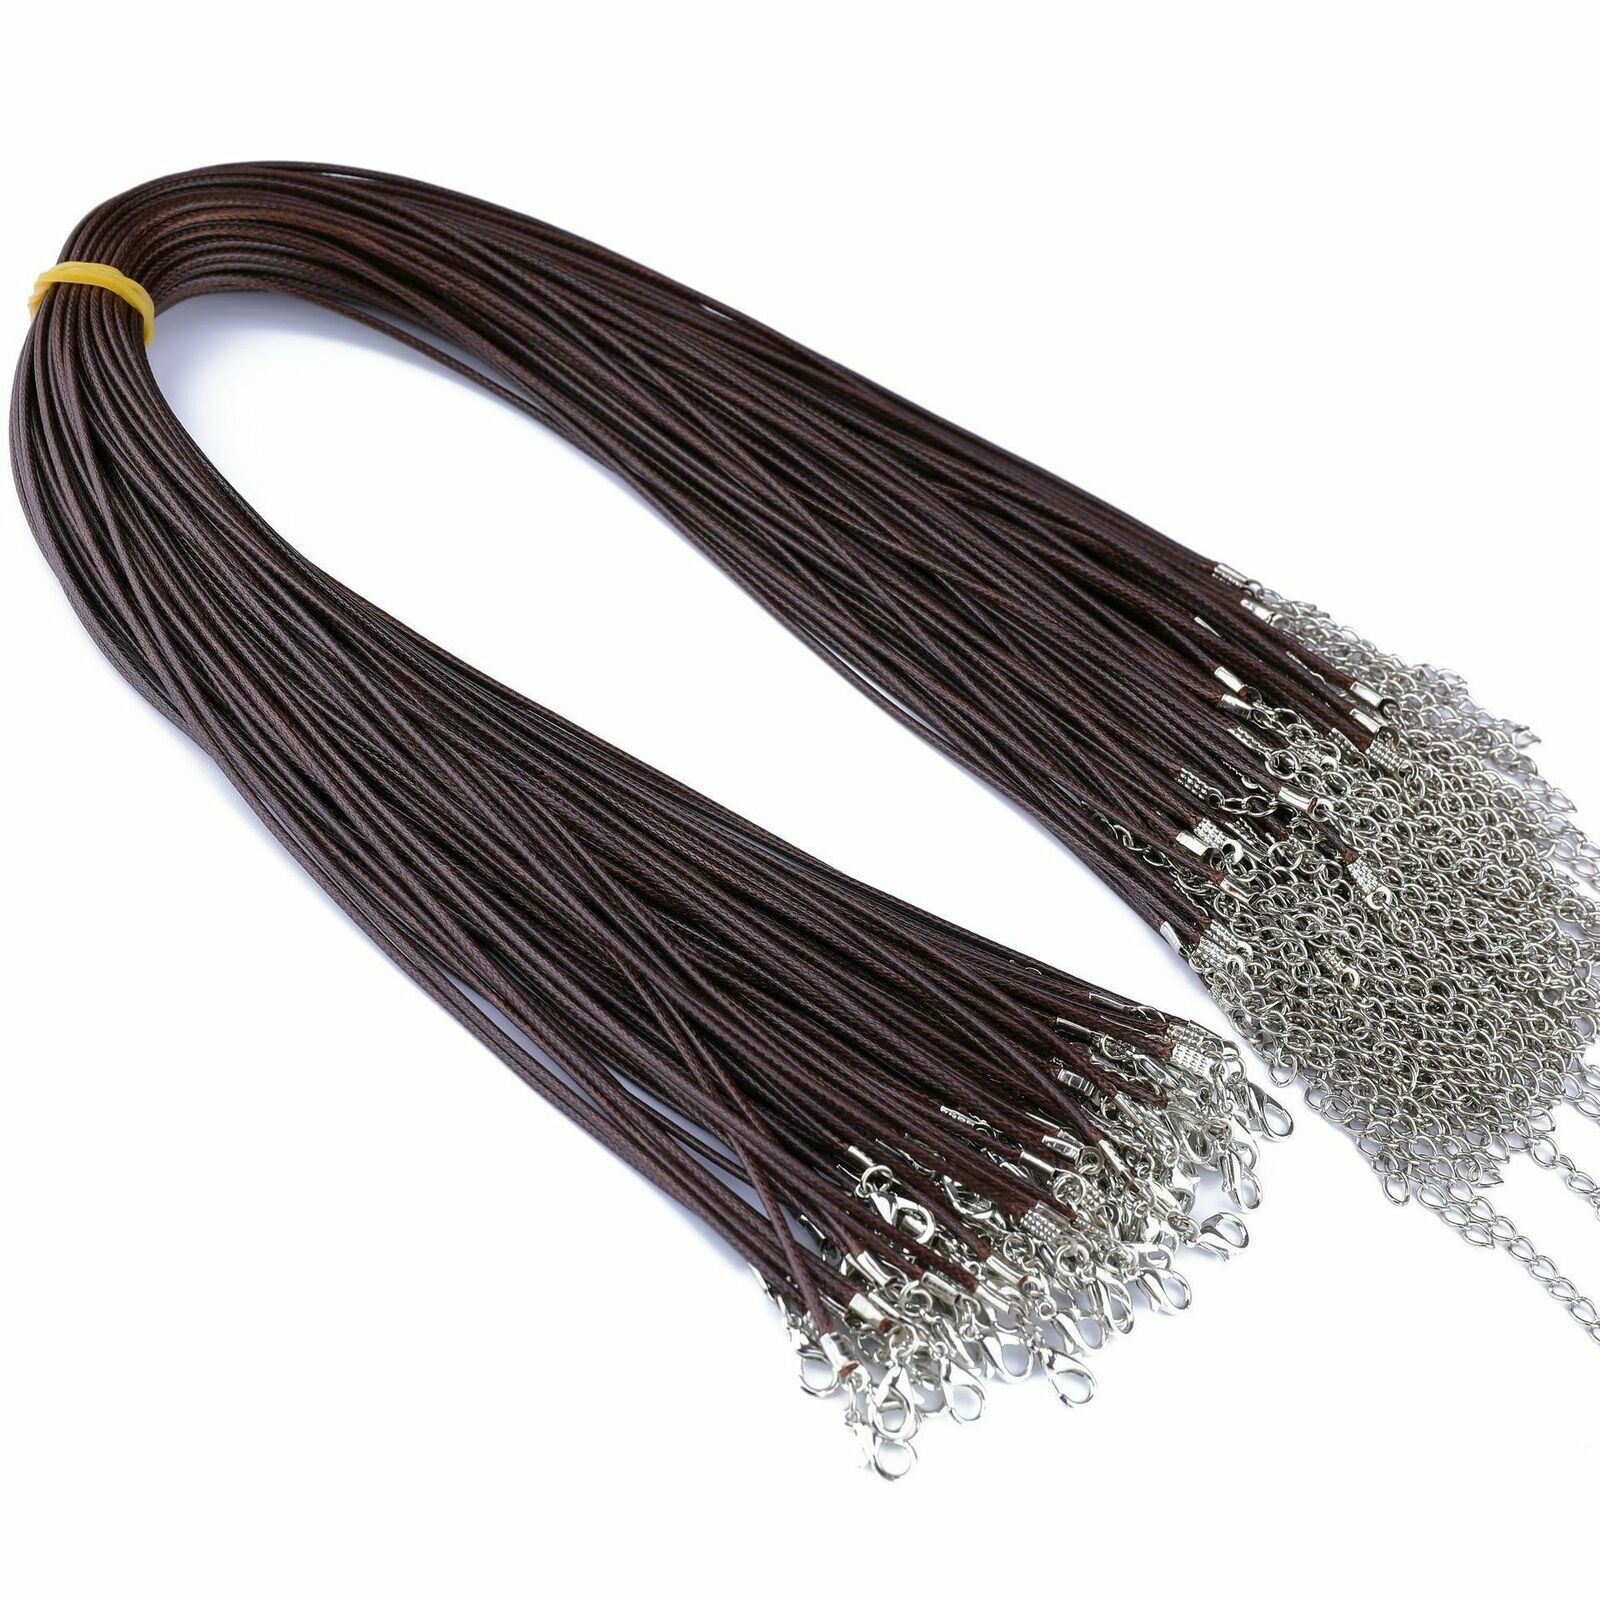 100pcs 1.5mm Coffee Wax Leather Cord Necklace Rope 45cm Chain Lobster Clasp DIY Unbranded - фотография #9